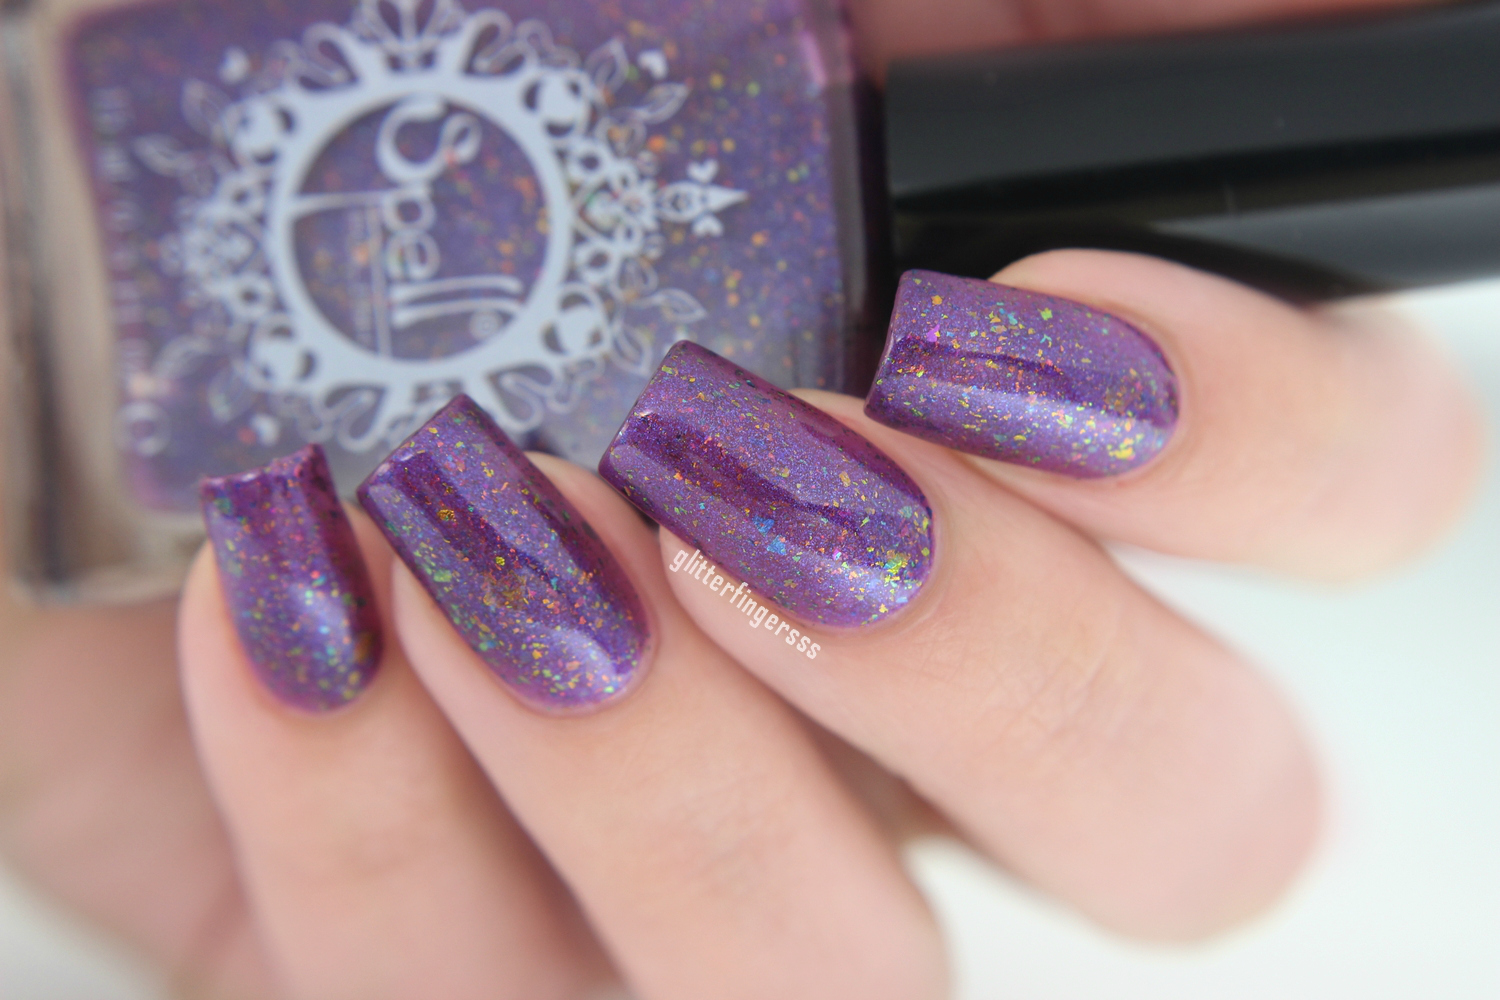 Spell Polish swatch/review ~ Glitterfingersss in english